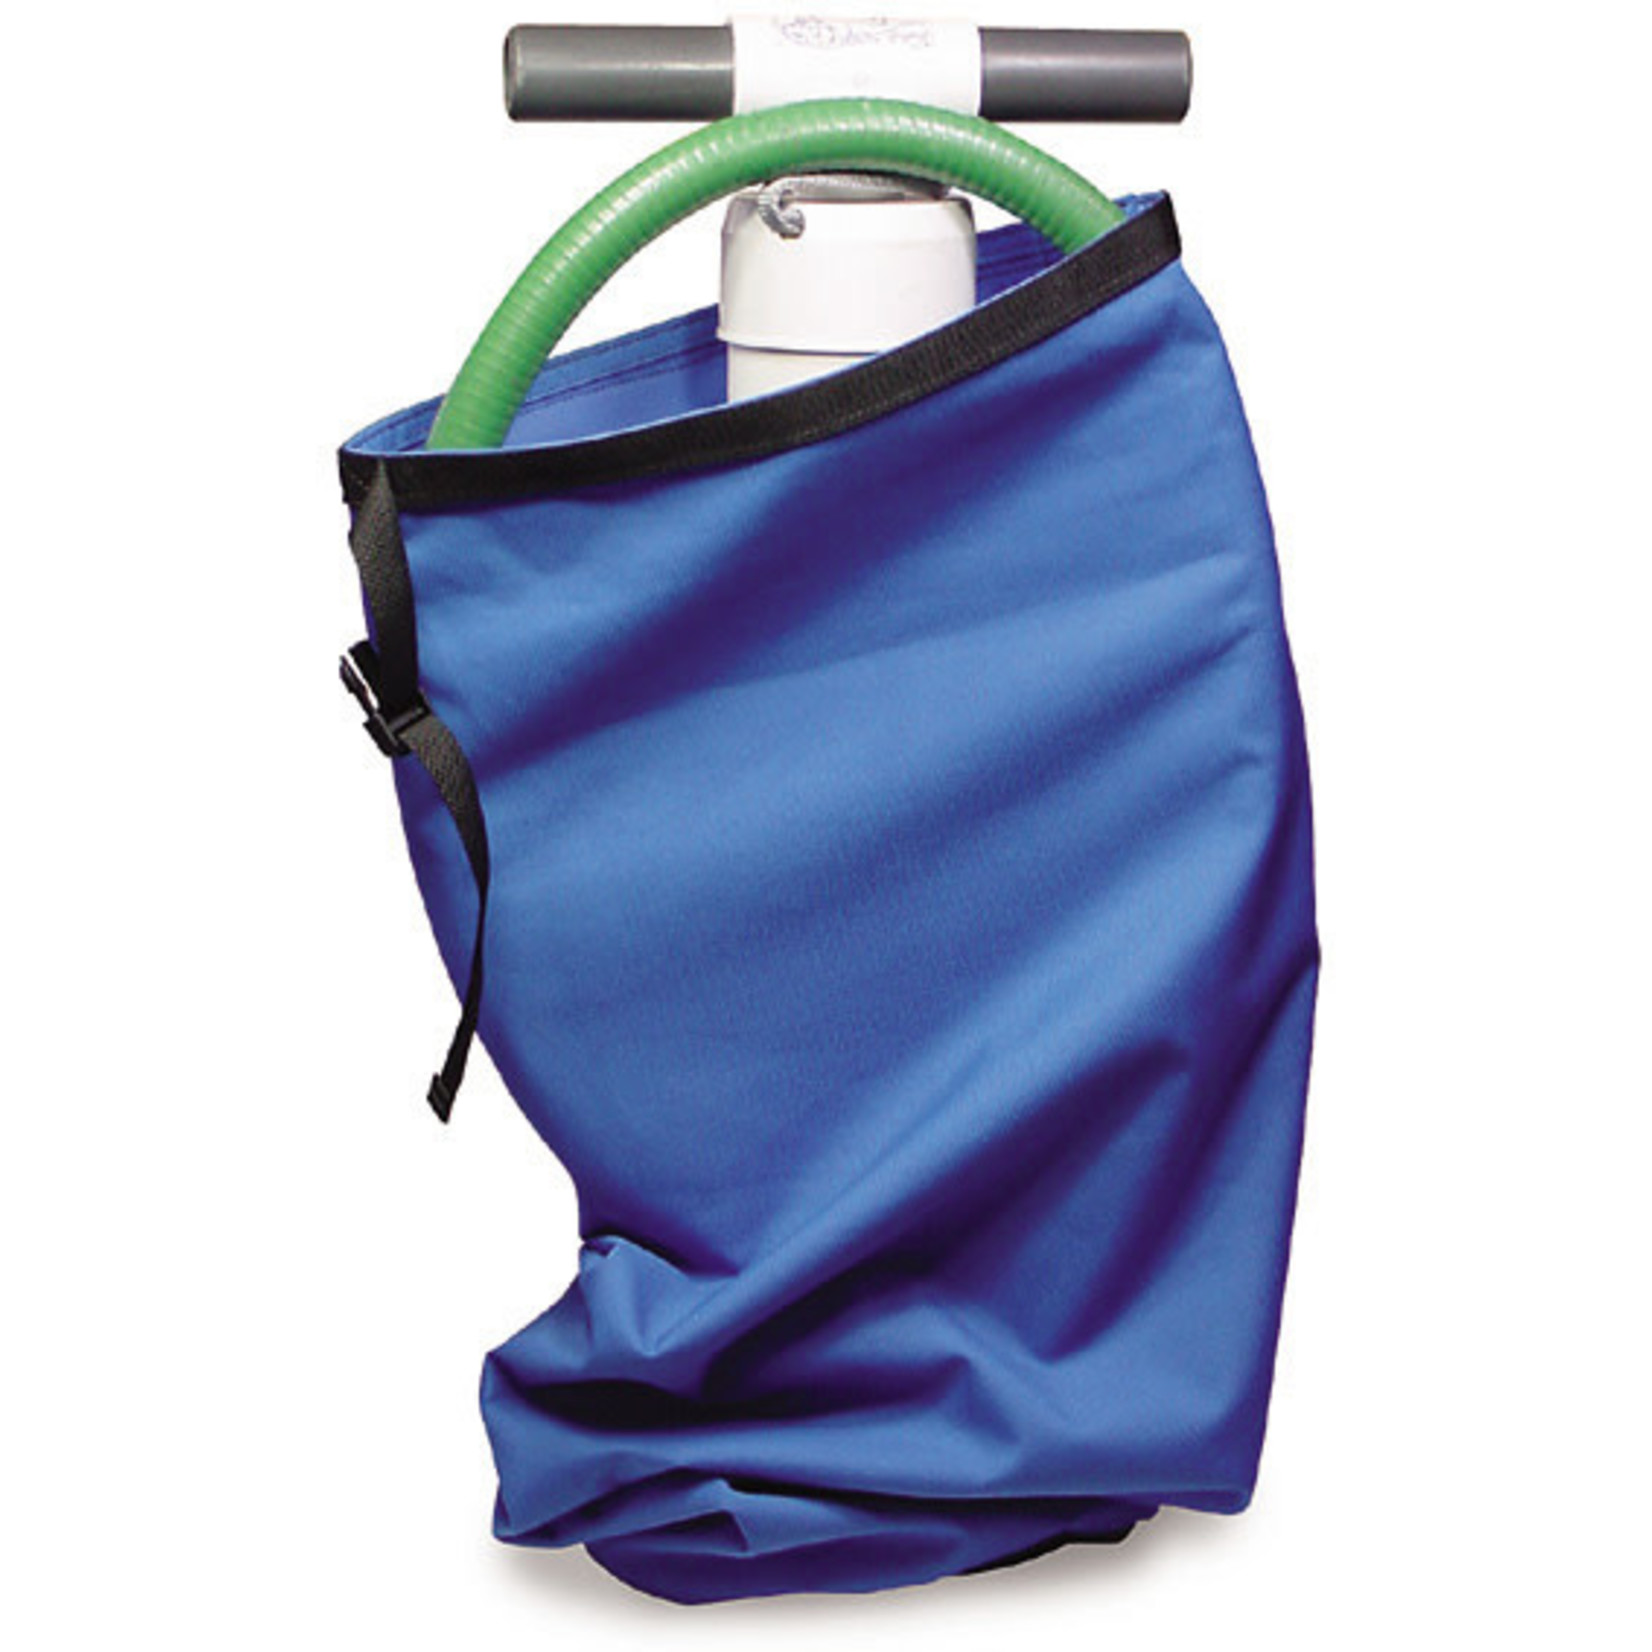 Whitewater Designs Whitewater Designs Pump Bag